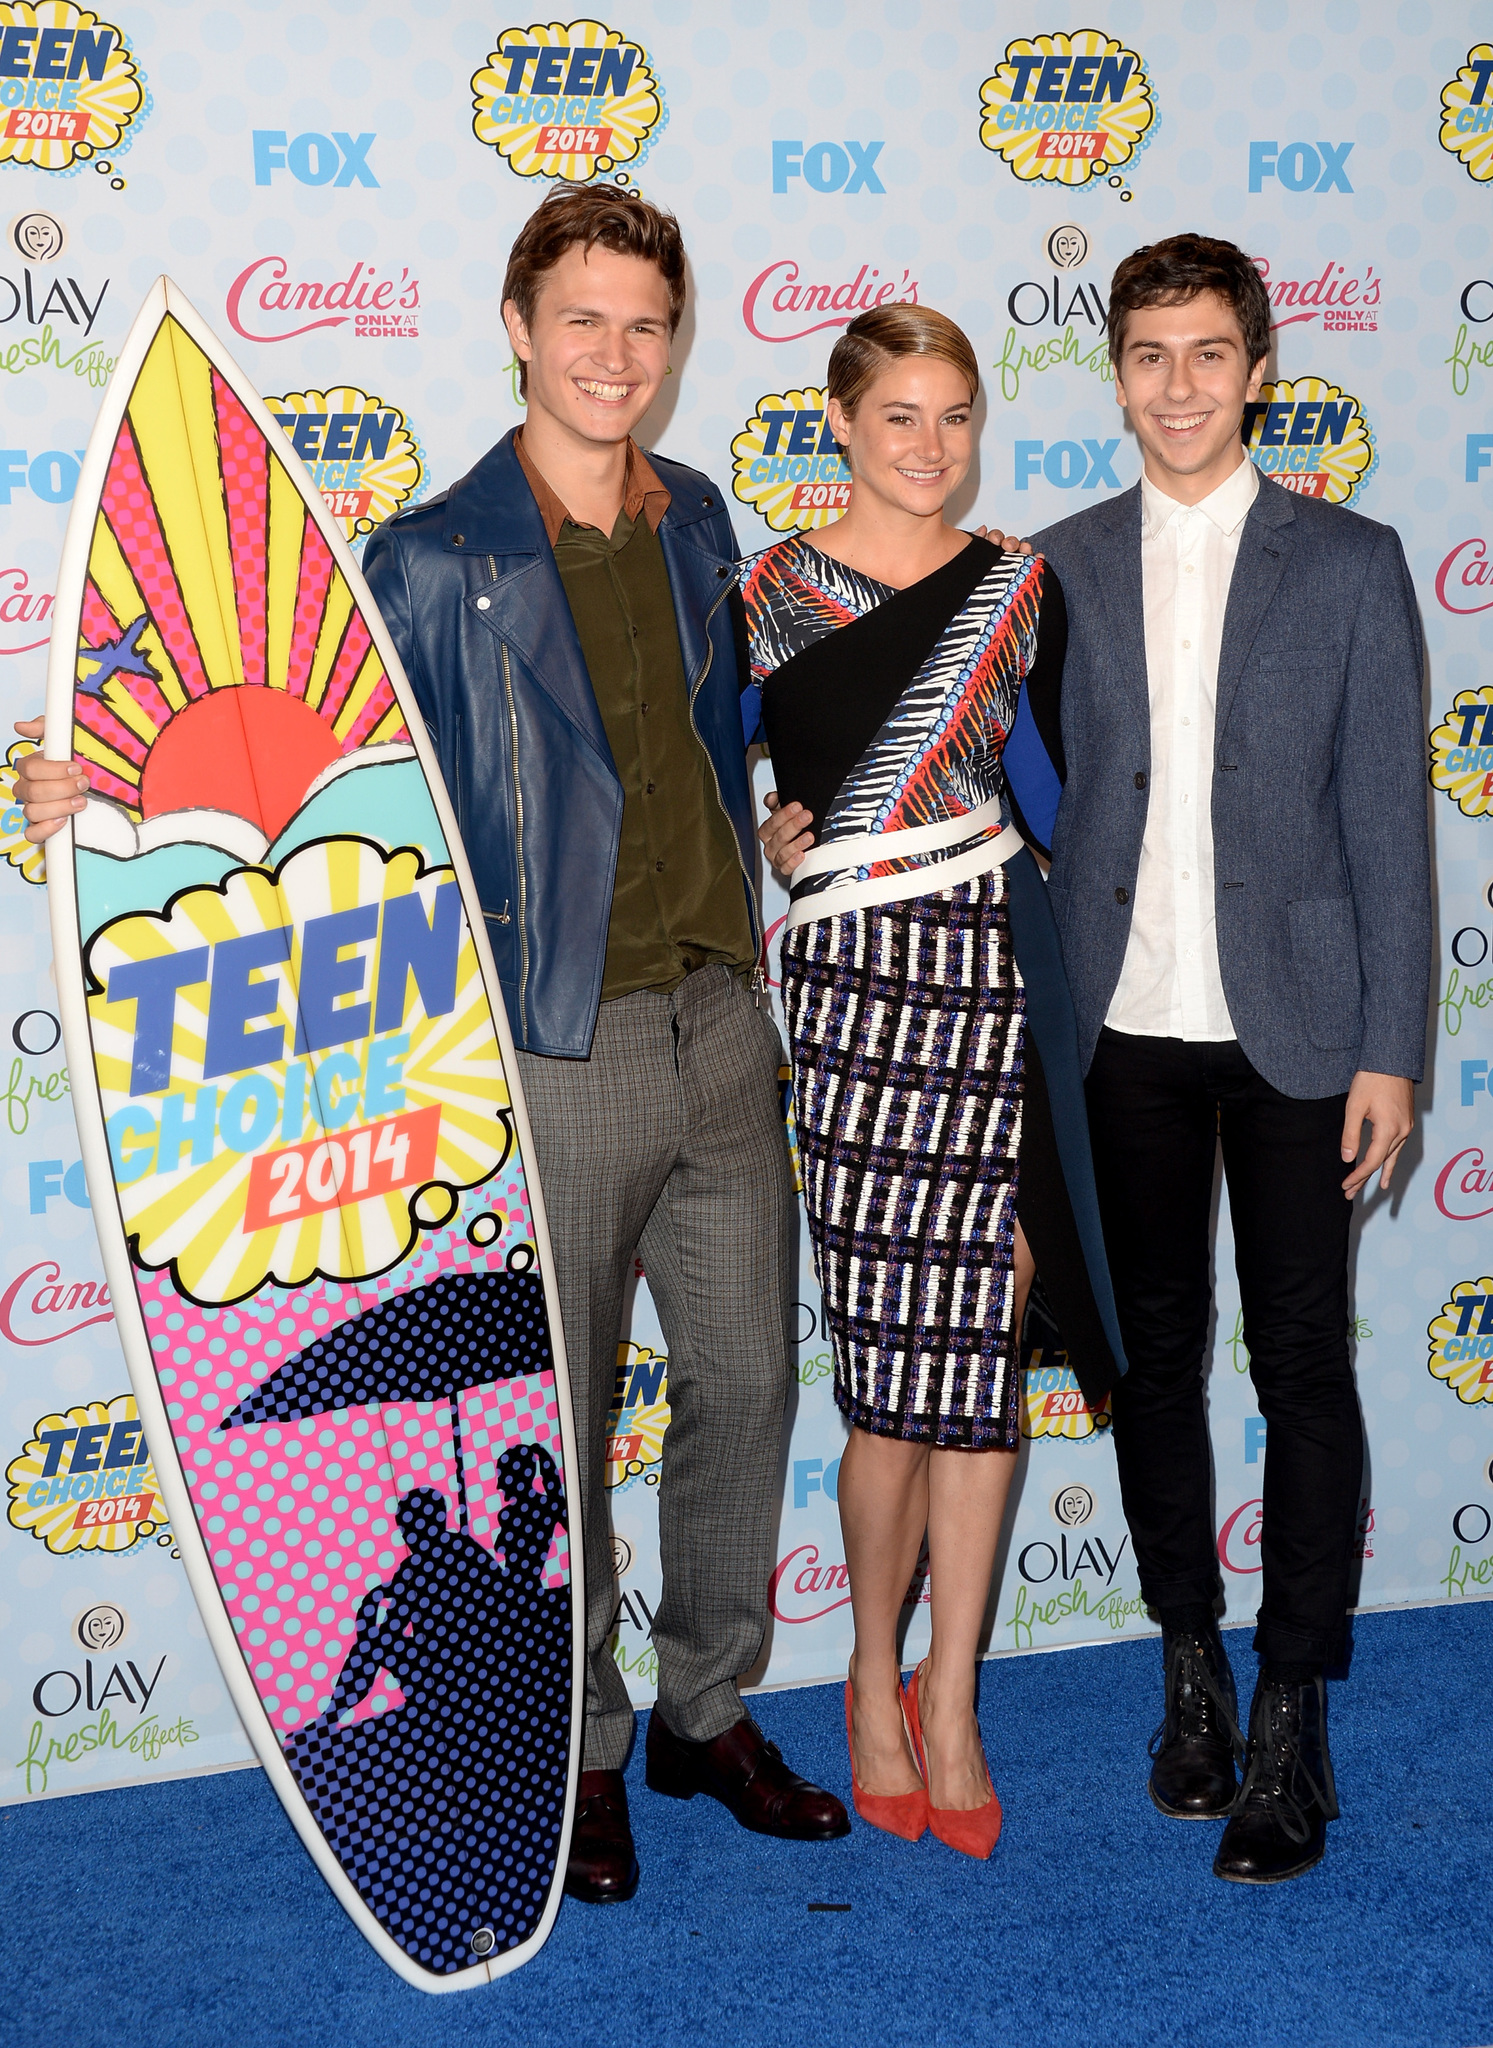 Shailene Woodley, Nat Wolff and Ansel Elgort at event of Teen Choice Awards 2014 (2014)